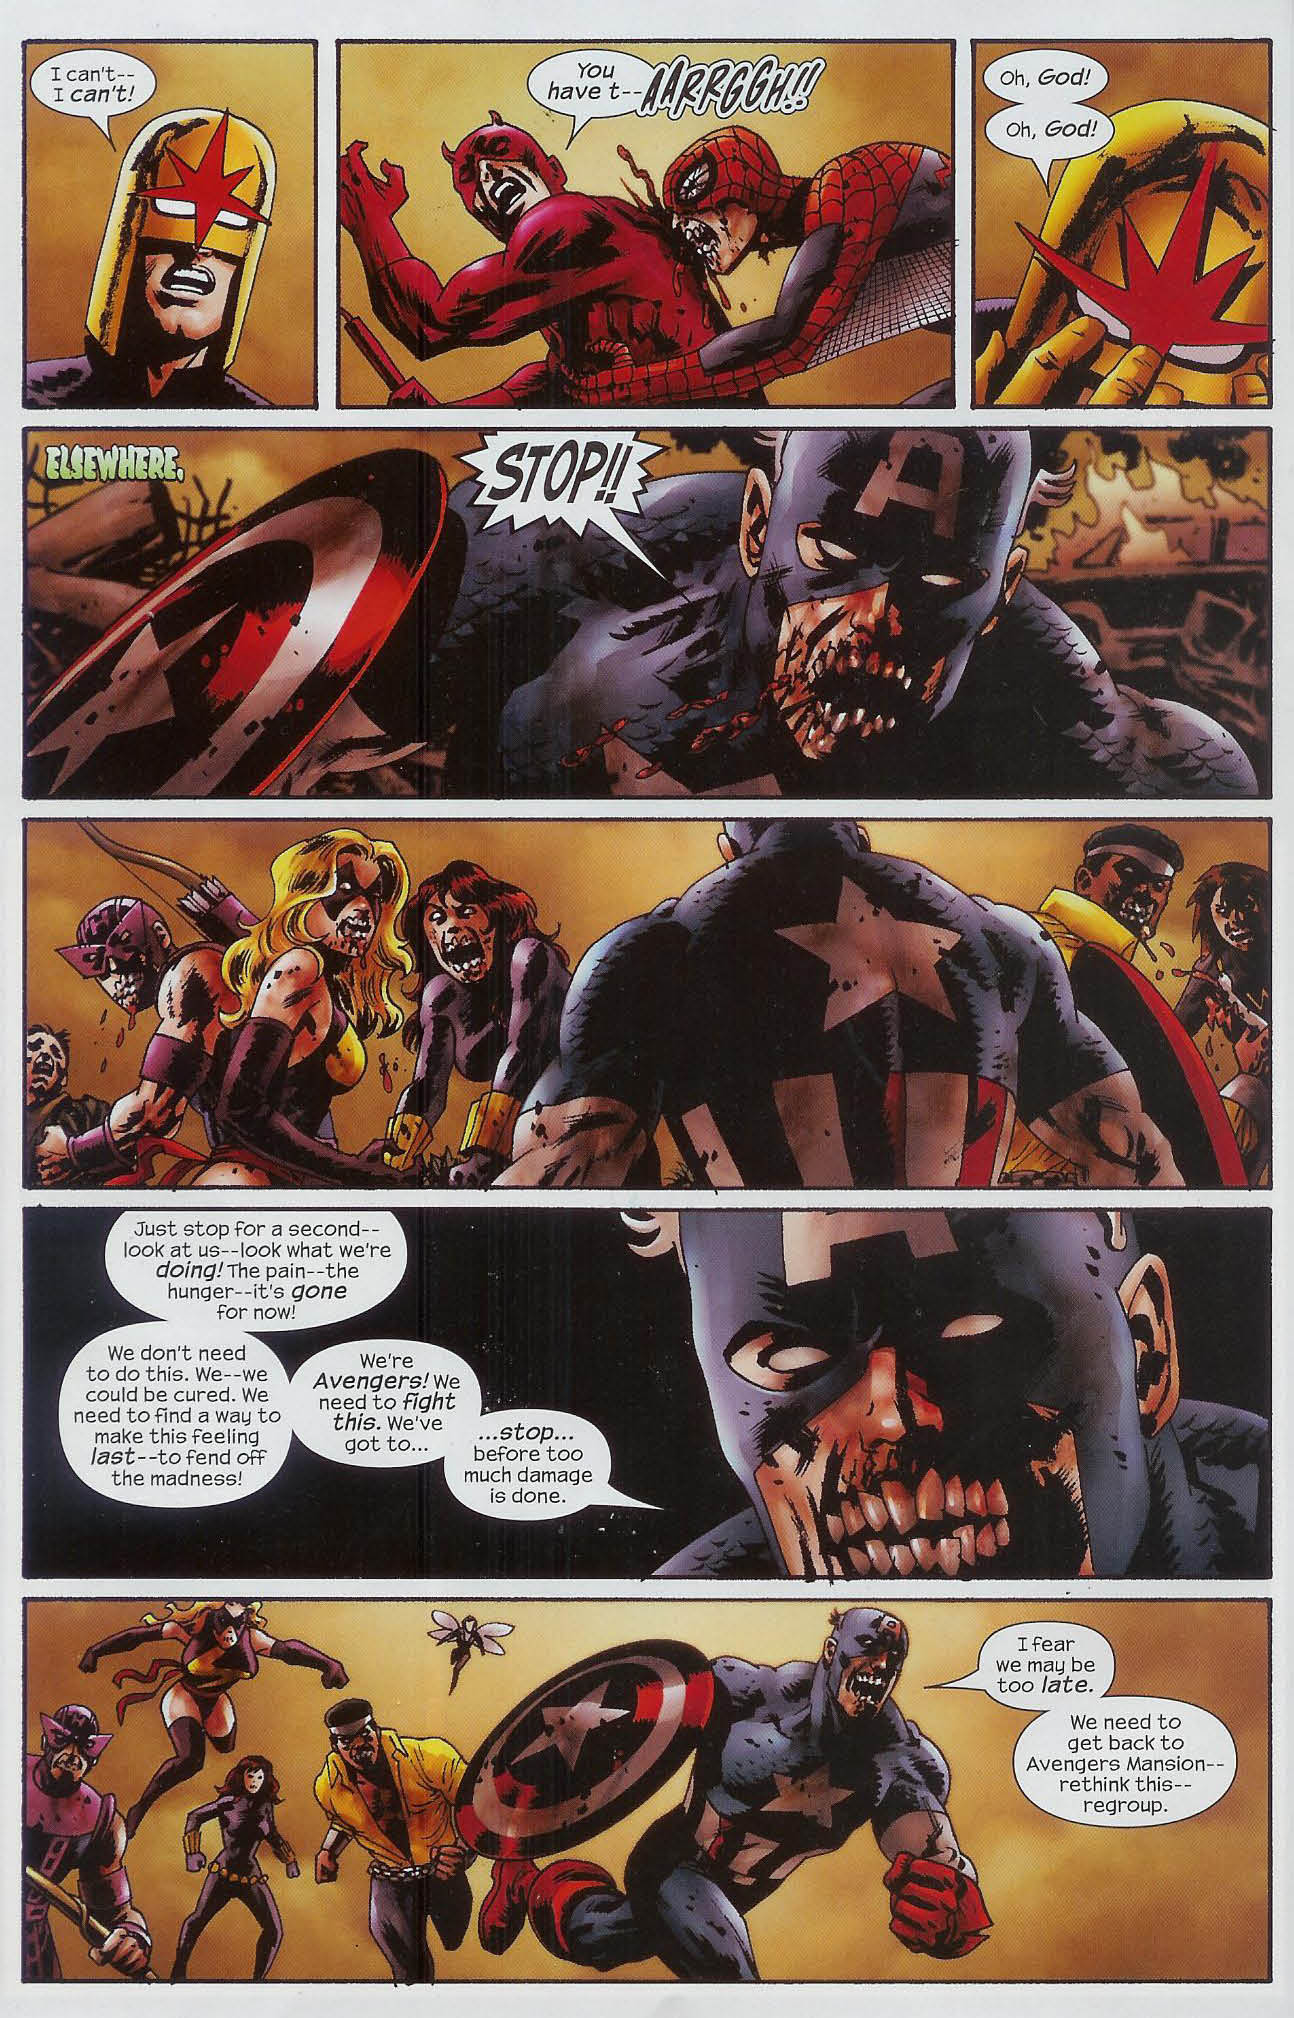 Marvel Zombies Dead Days - A